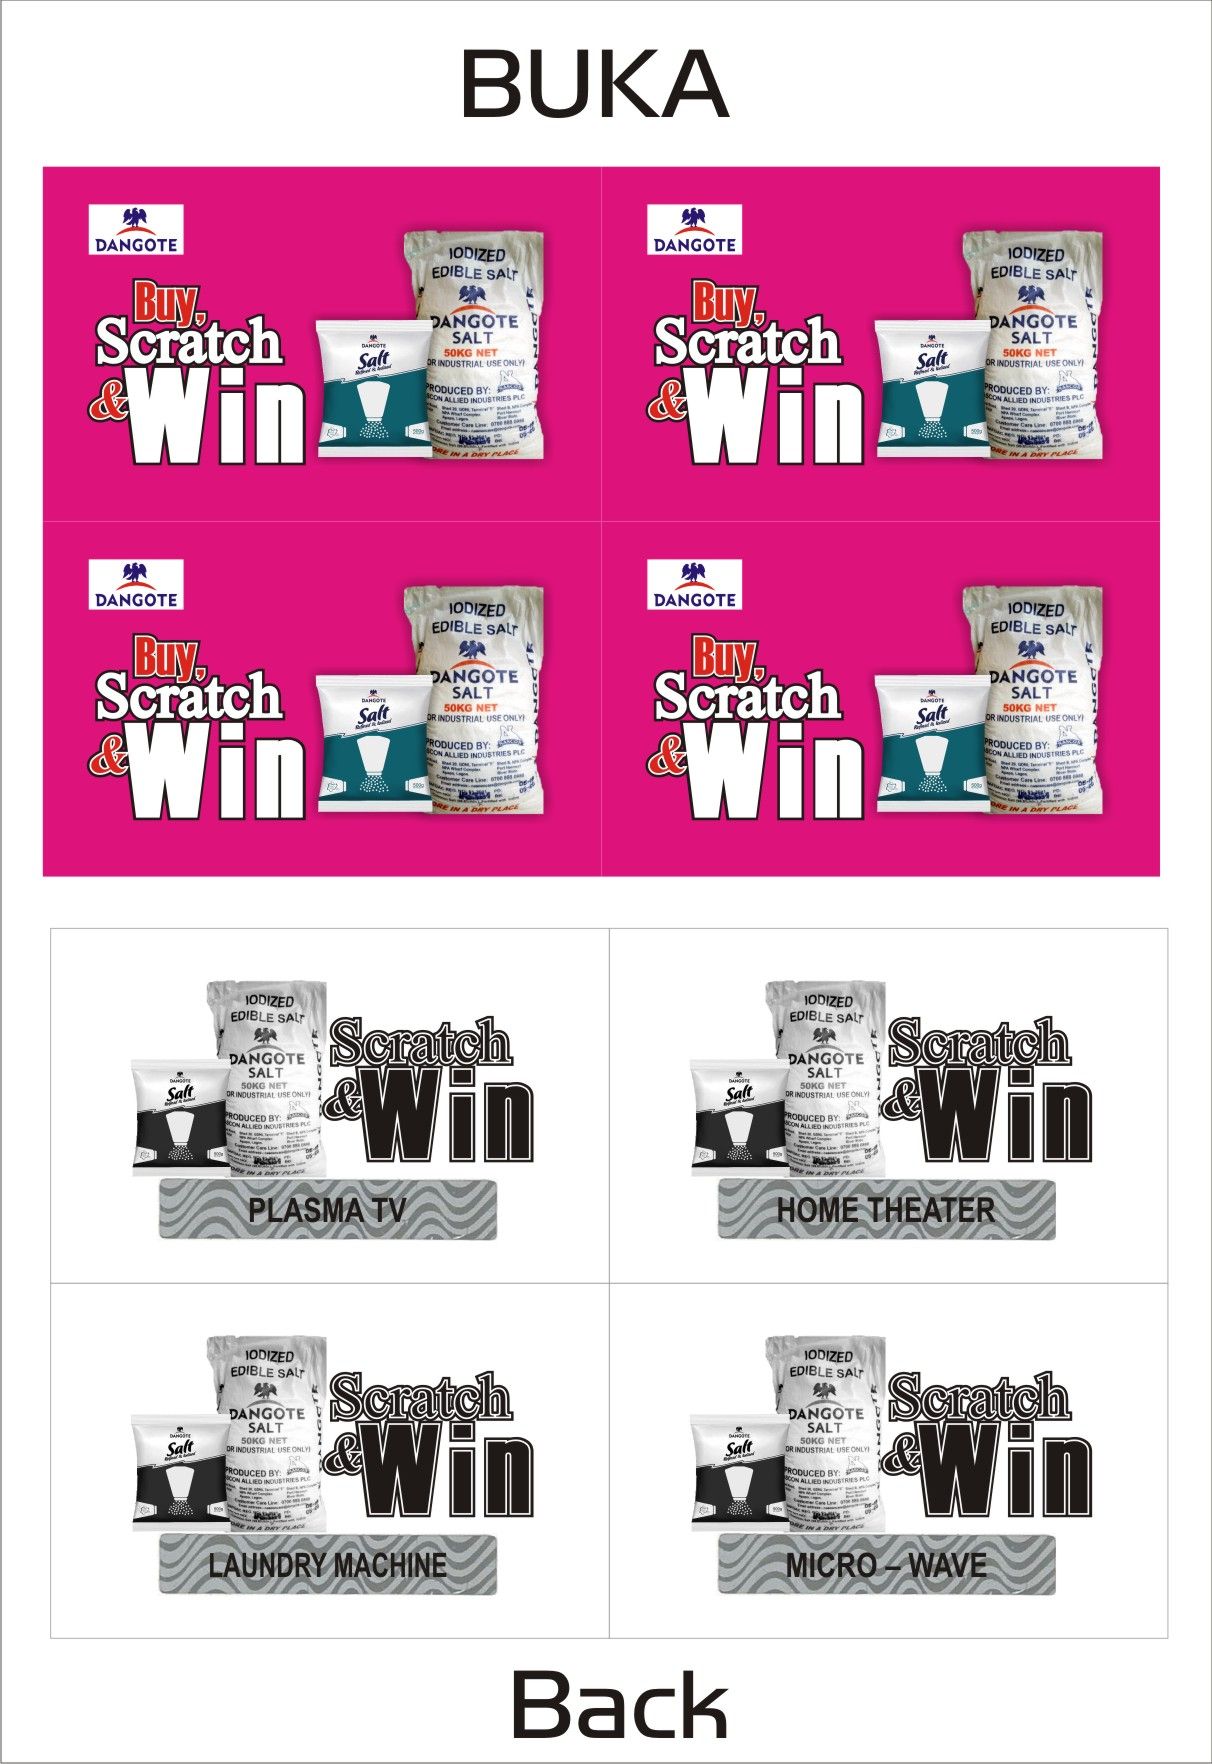 CALL CHINEDU ON 09022536974 TO HELP BOOST THE SALES OF YOUR PRODUCT USING SCRATCH AND WIN PROMOS